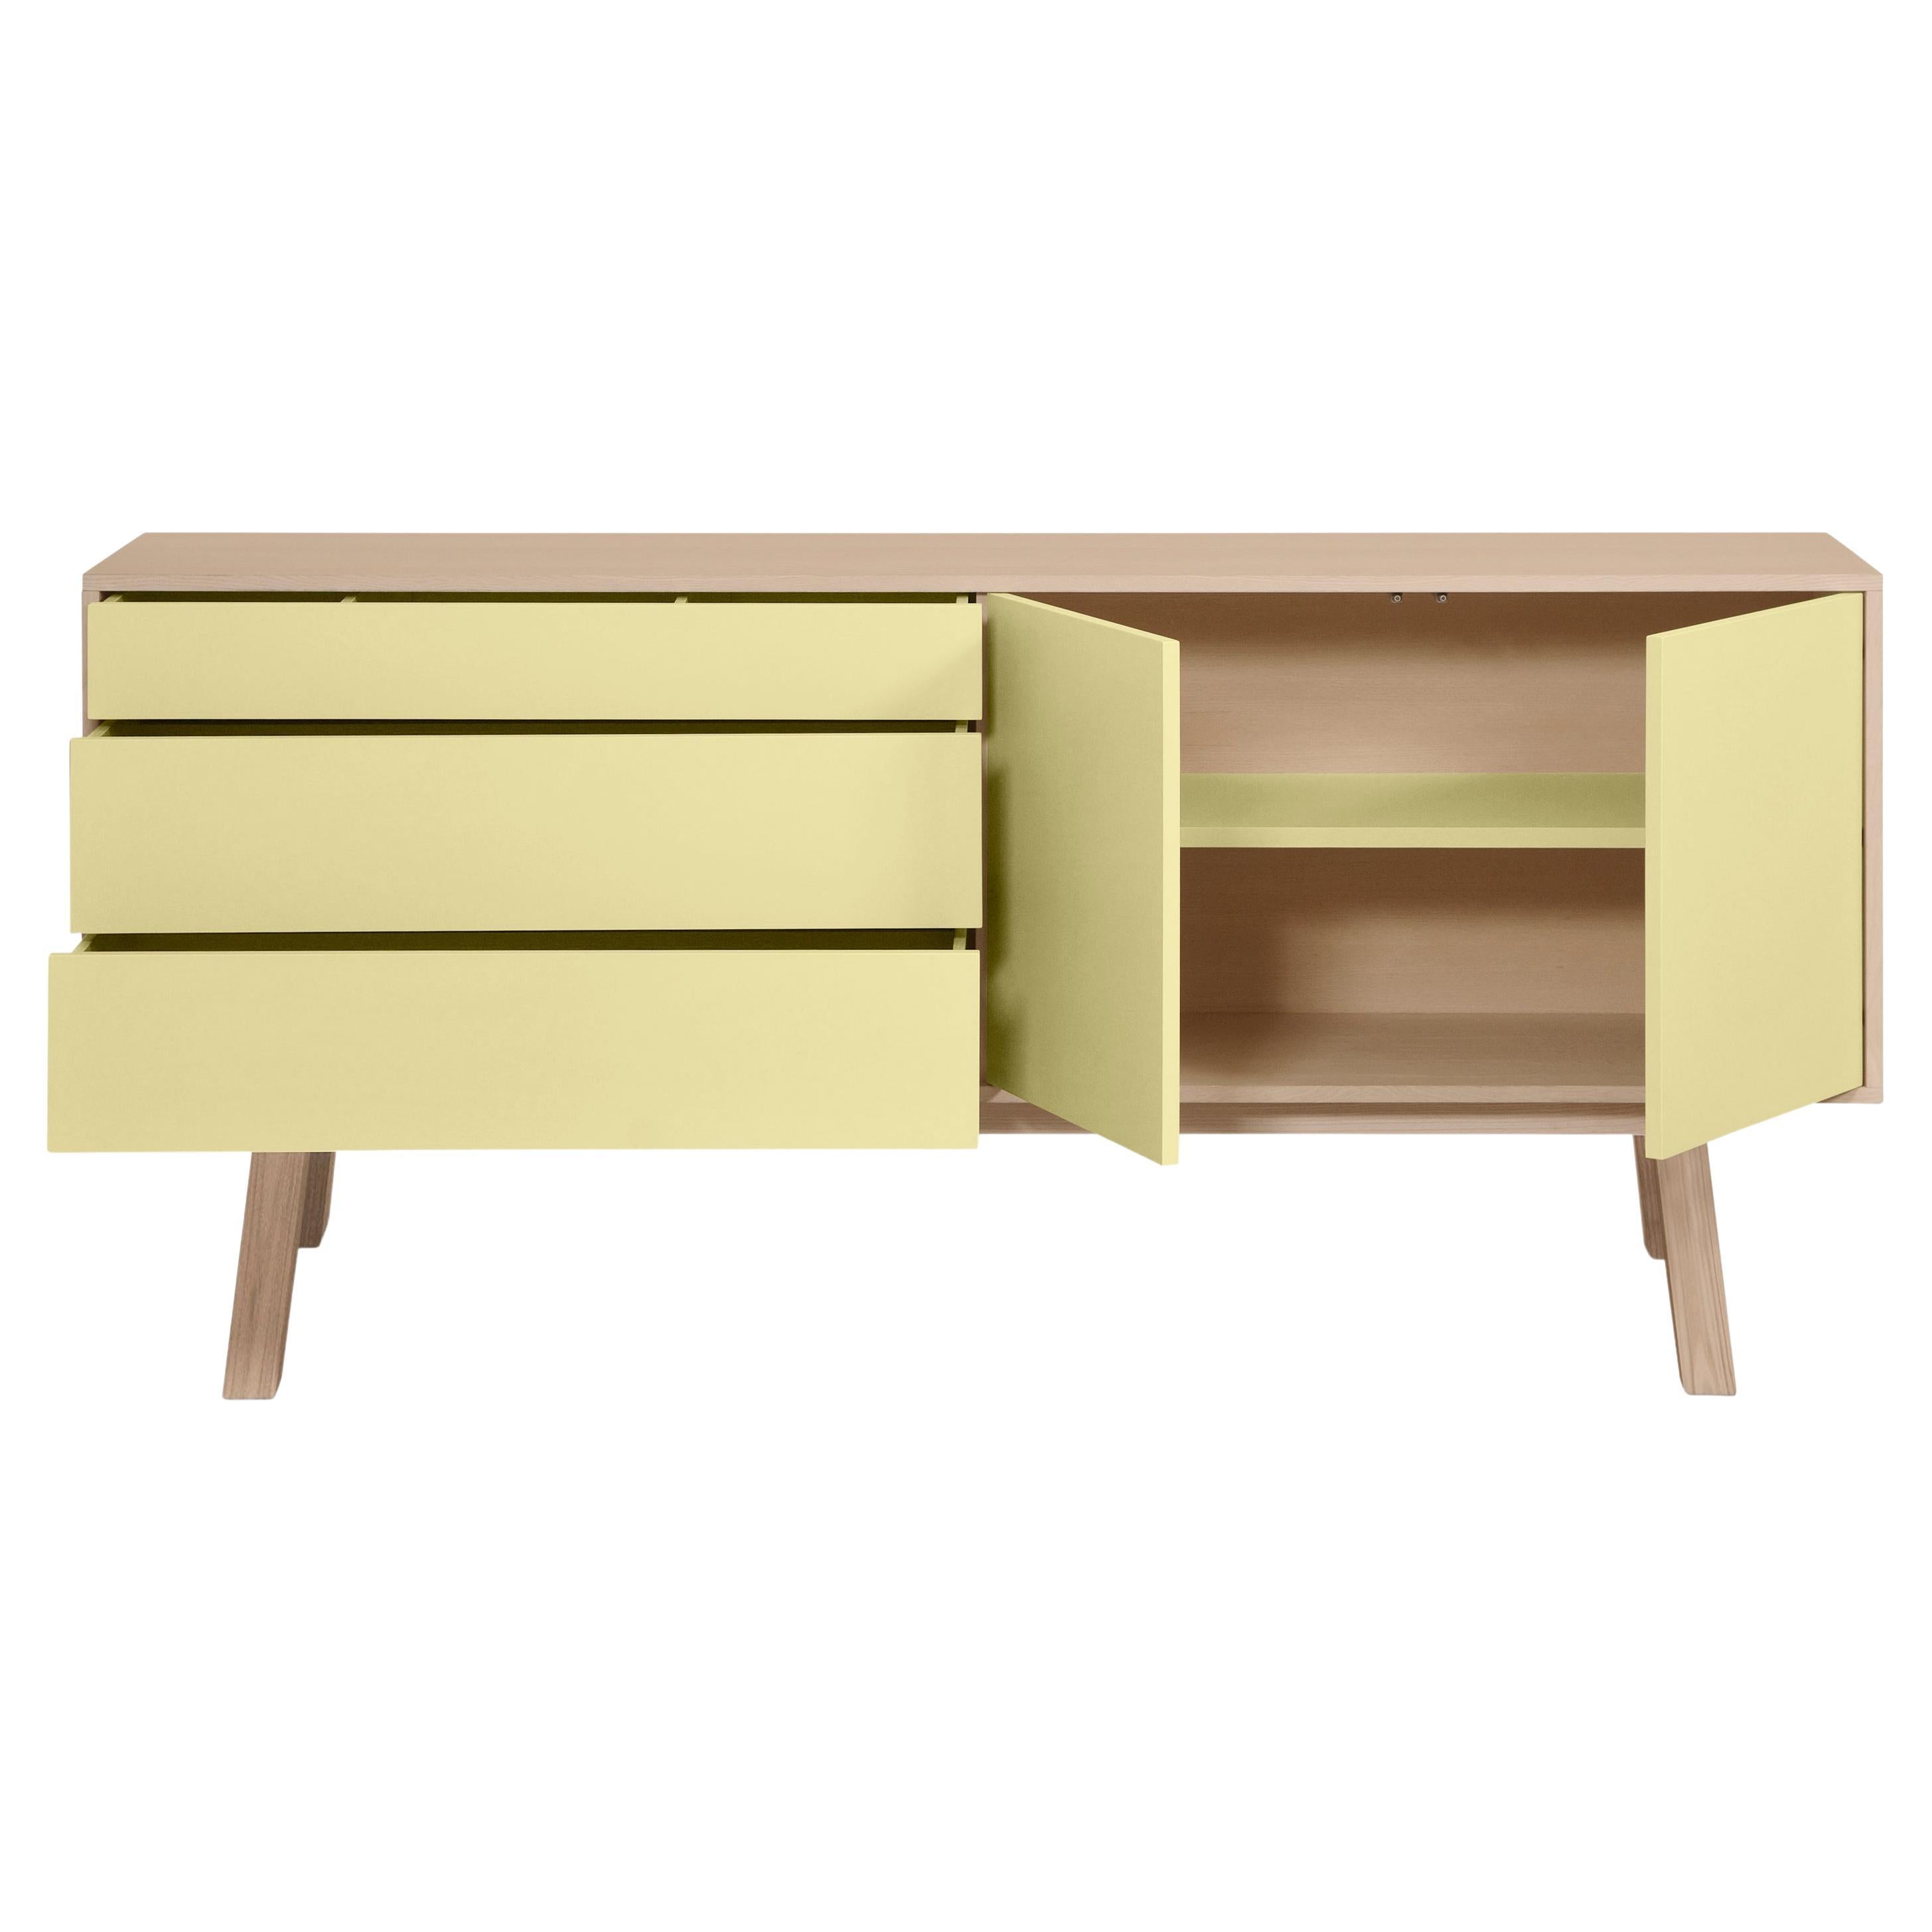 Yellow Higher Sideboard with doors and drawers designed in Paris by E. Gizard